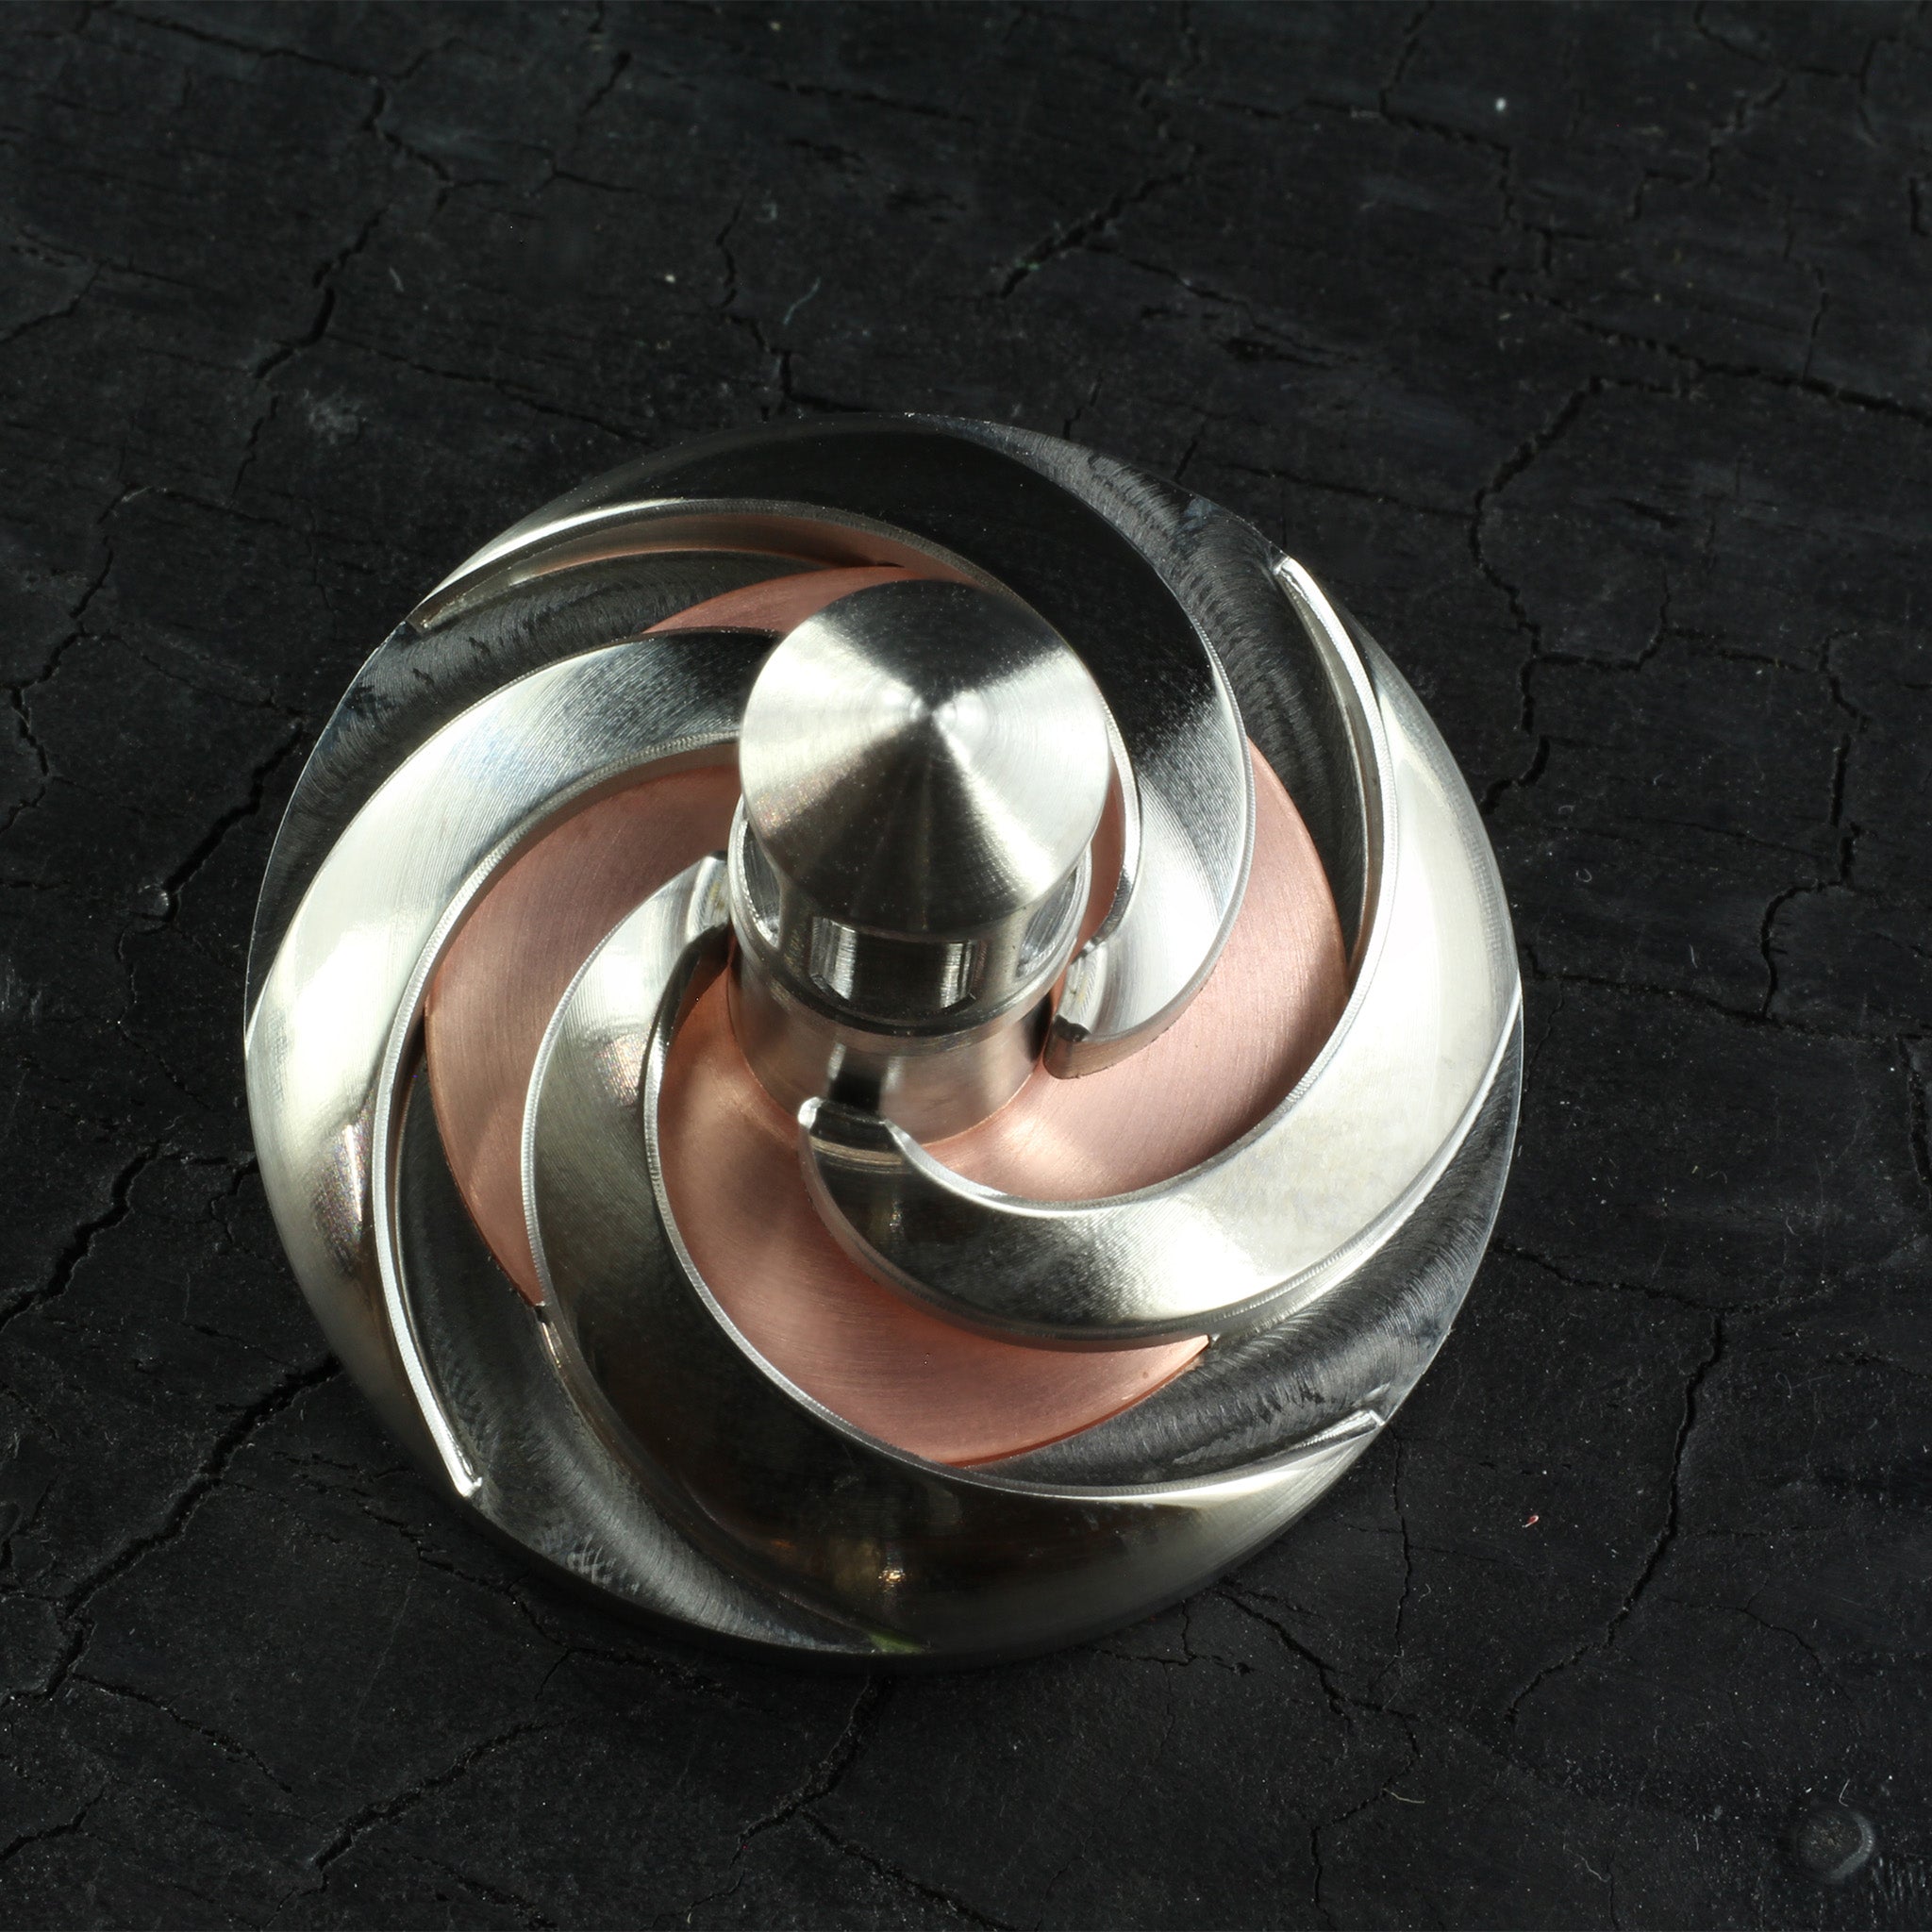 Storm - A Lighthouse-Themed Precision Spinning Top